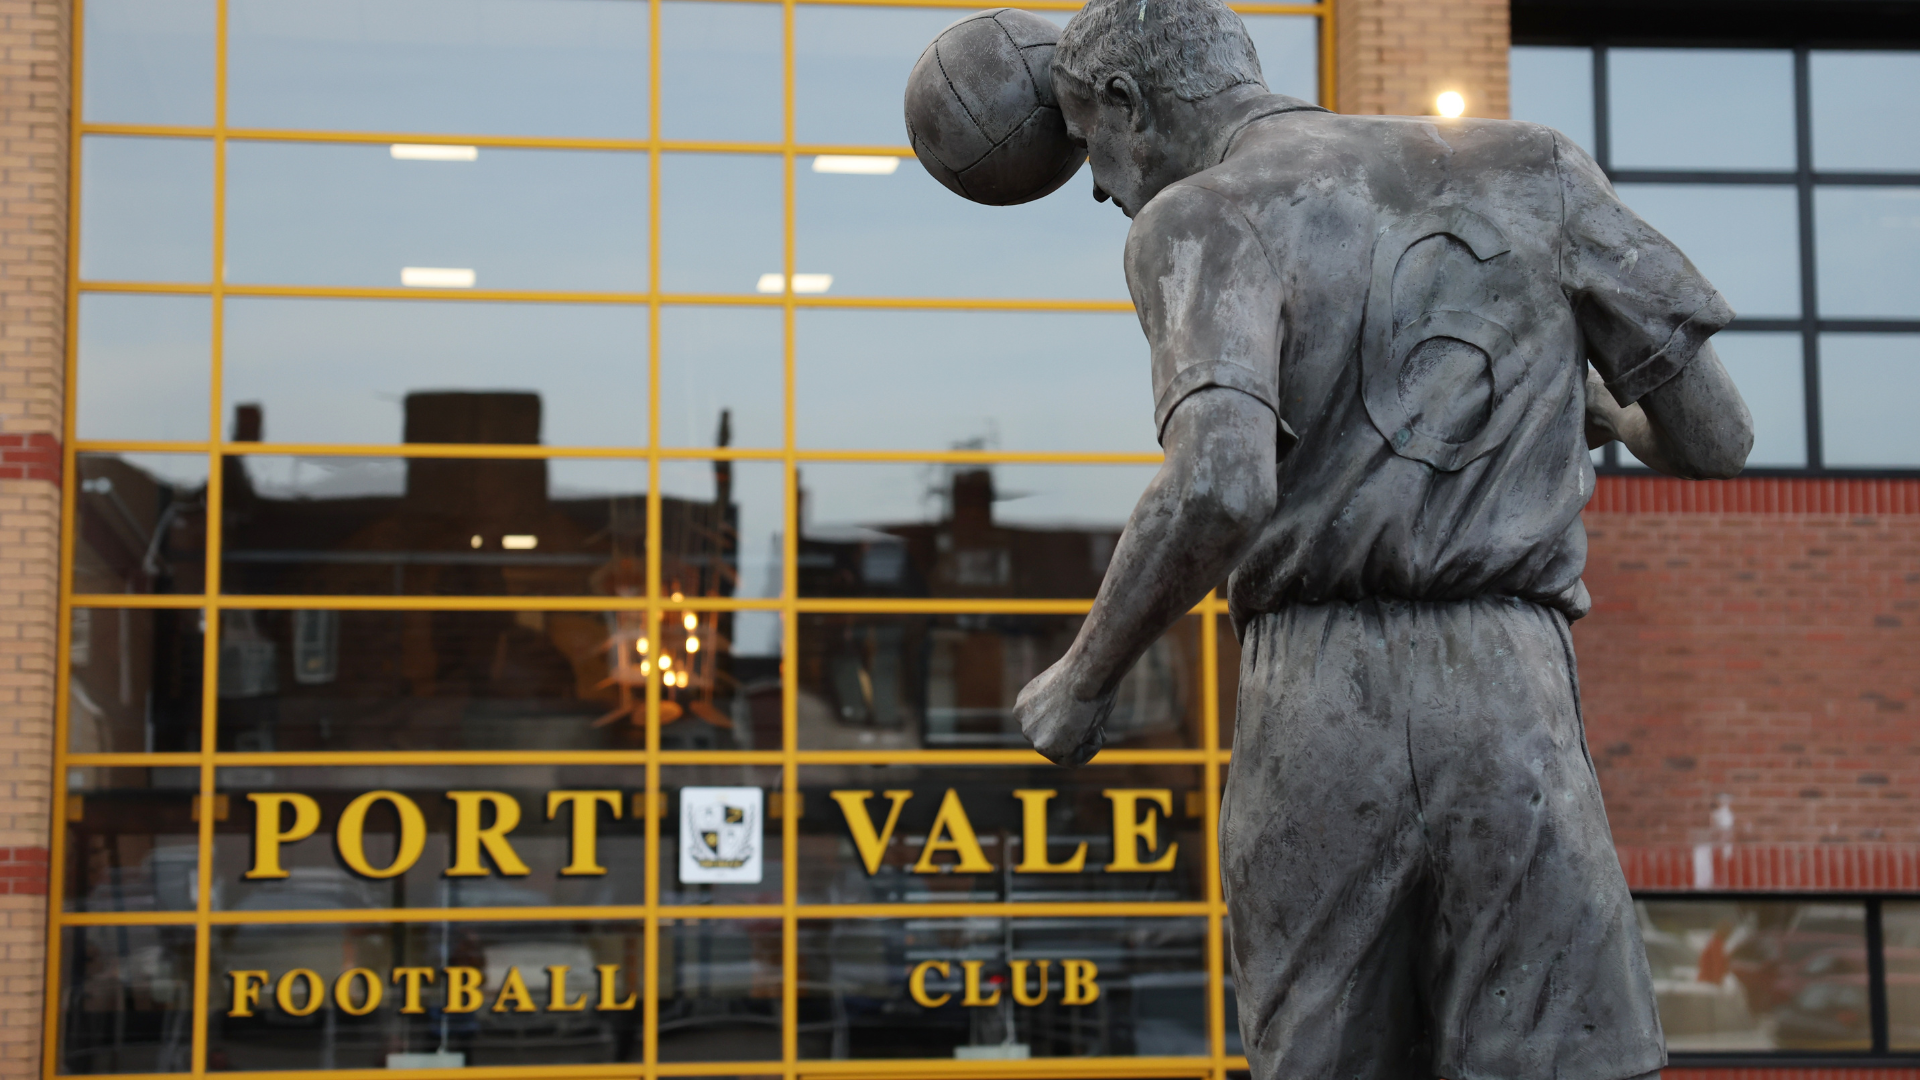 Port Vale general view